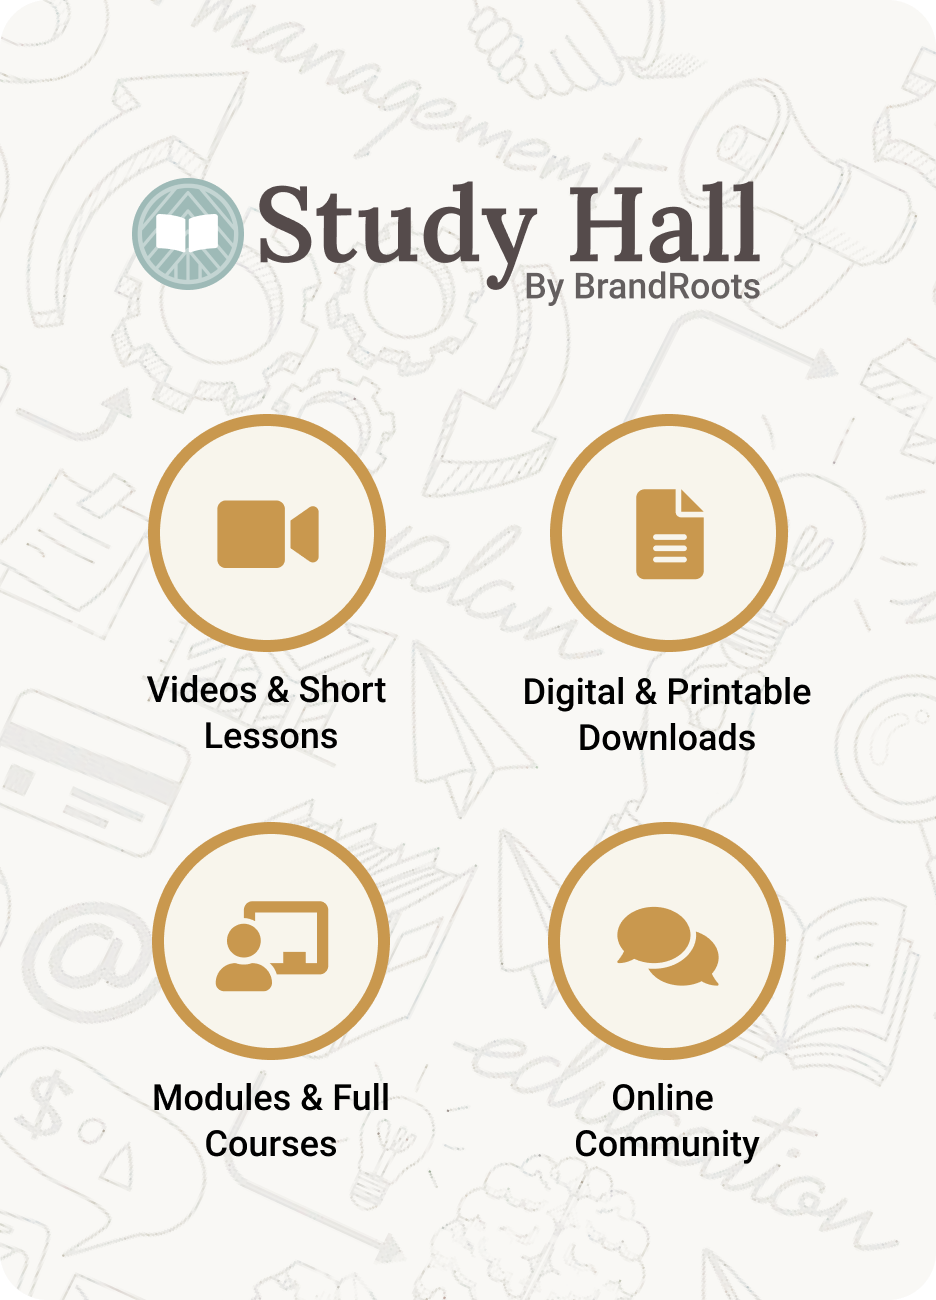 Study Hall by BrandRoots